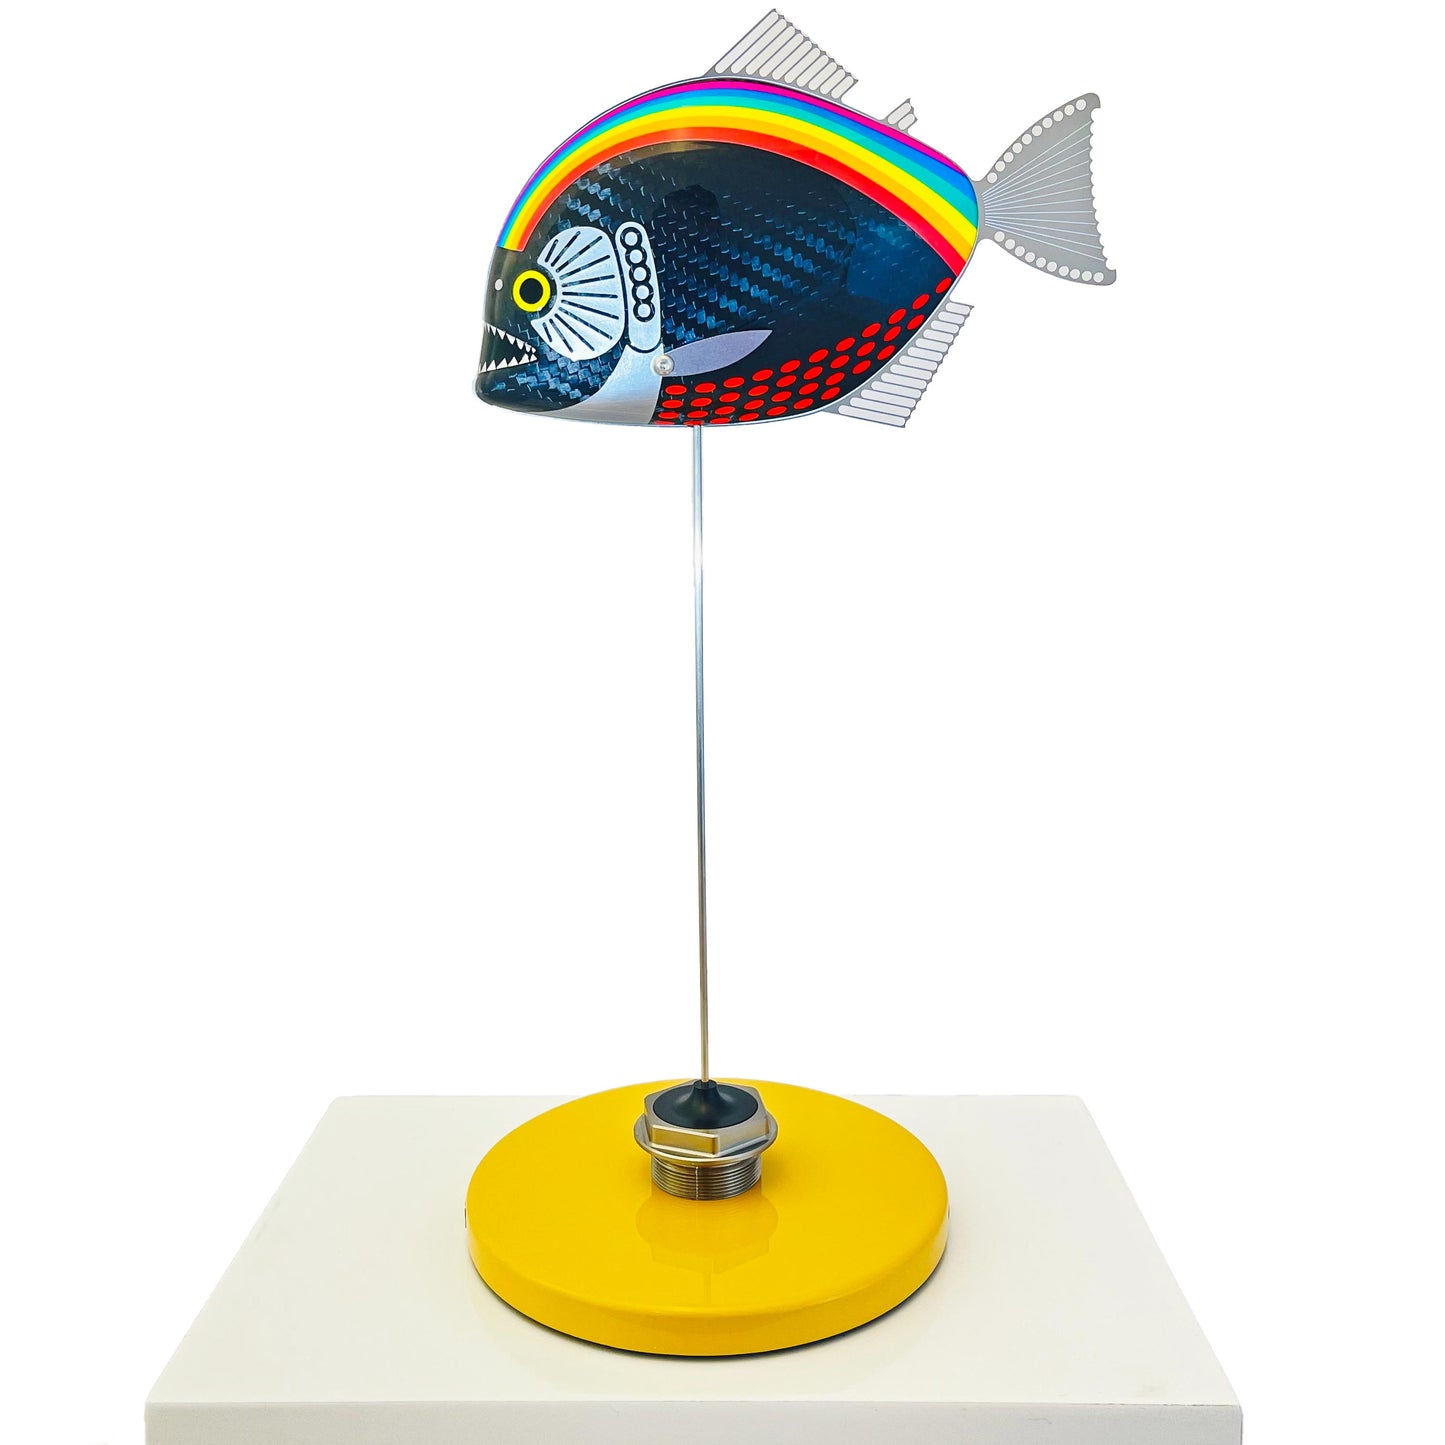 Carbon fibre piranha fish sculpture with NHS rainbow livery on a sandy base with F1 part